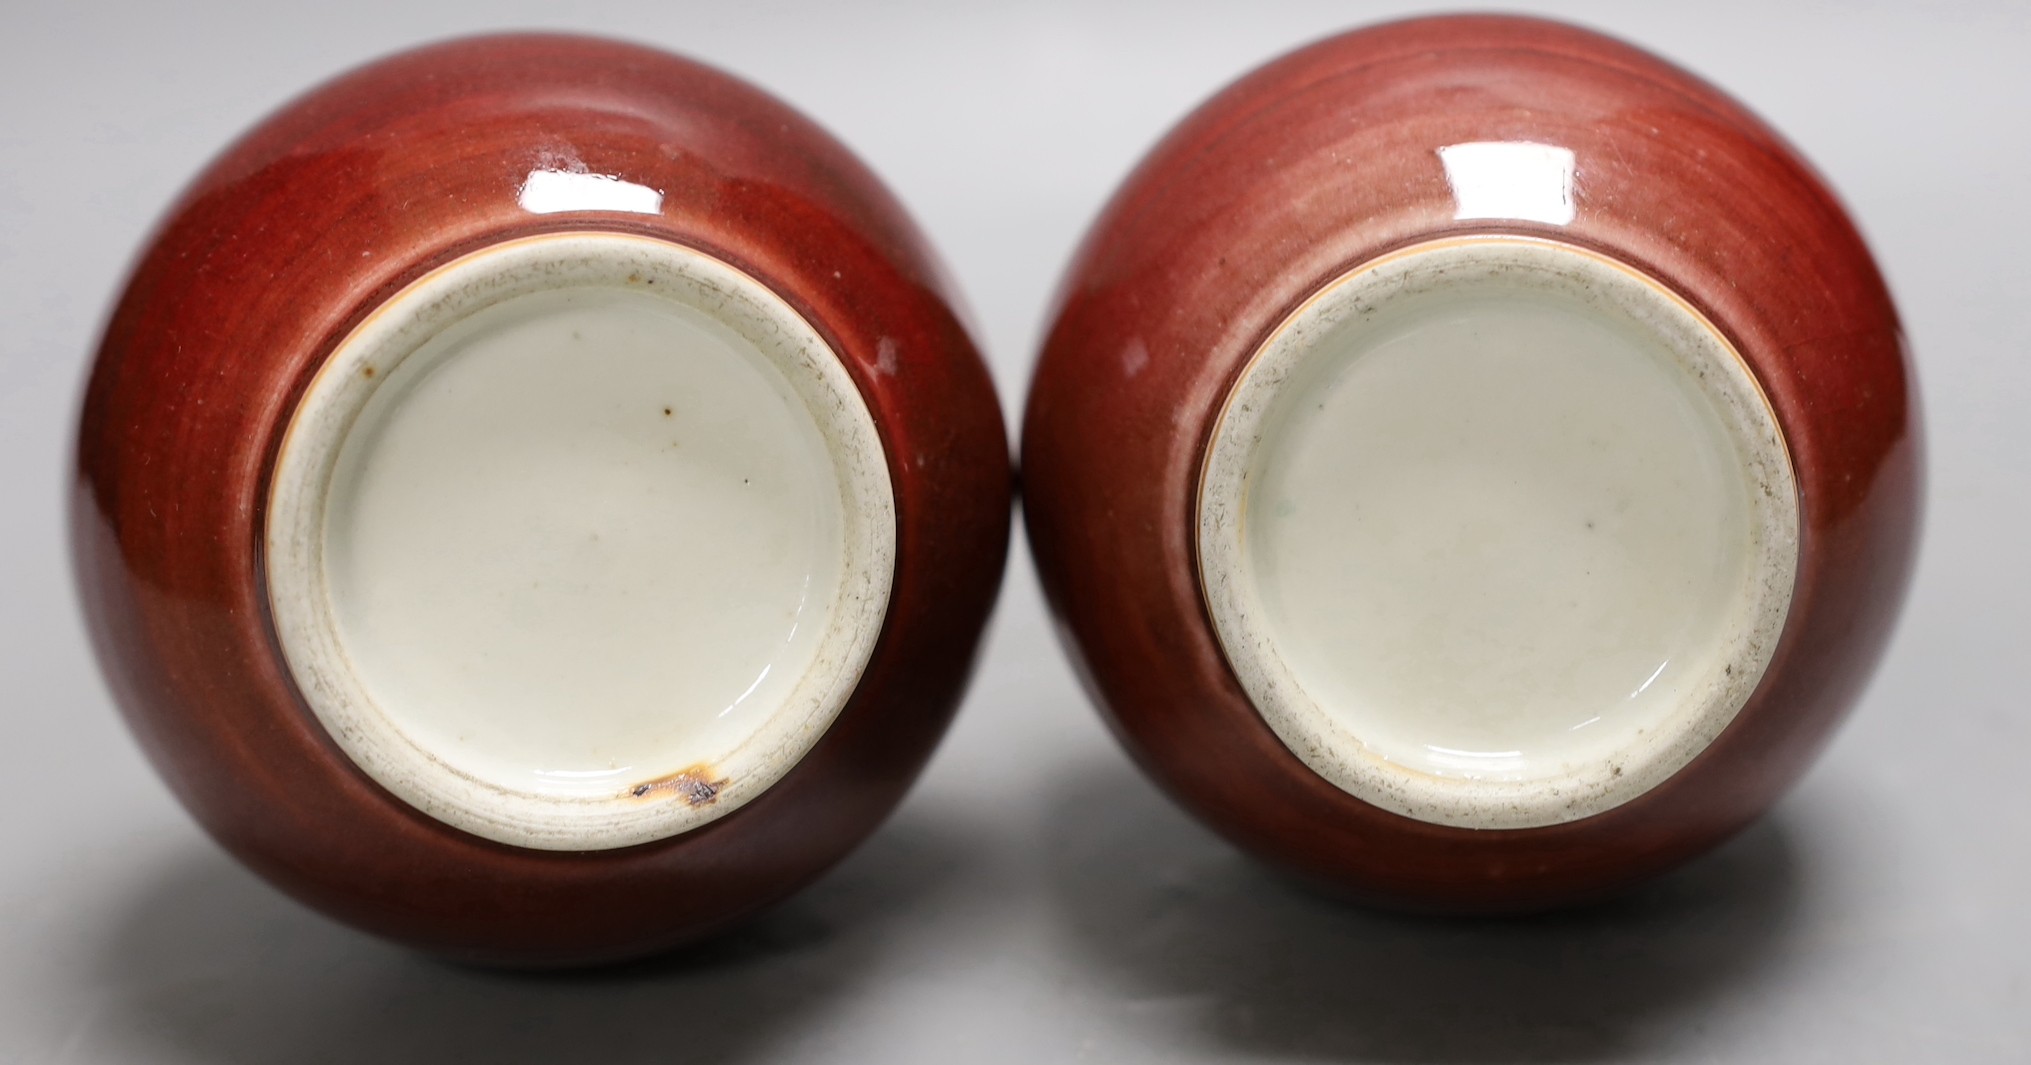 A pair of Chinese sang de boeuf glazed vases, early 20th century, 20cm high